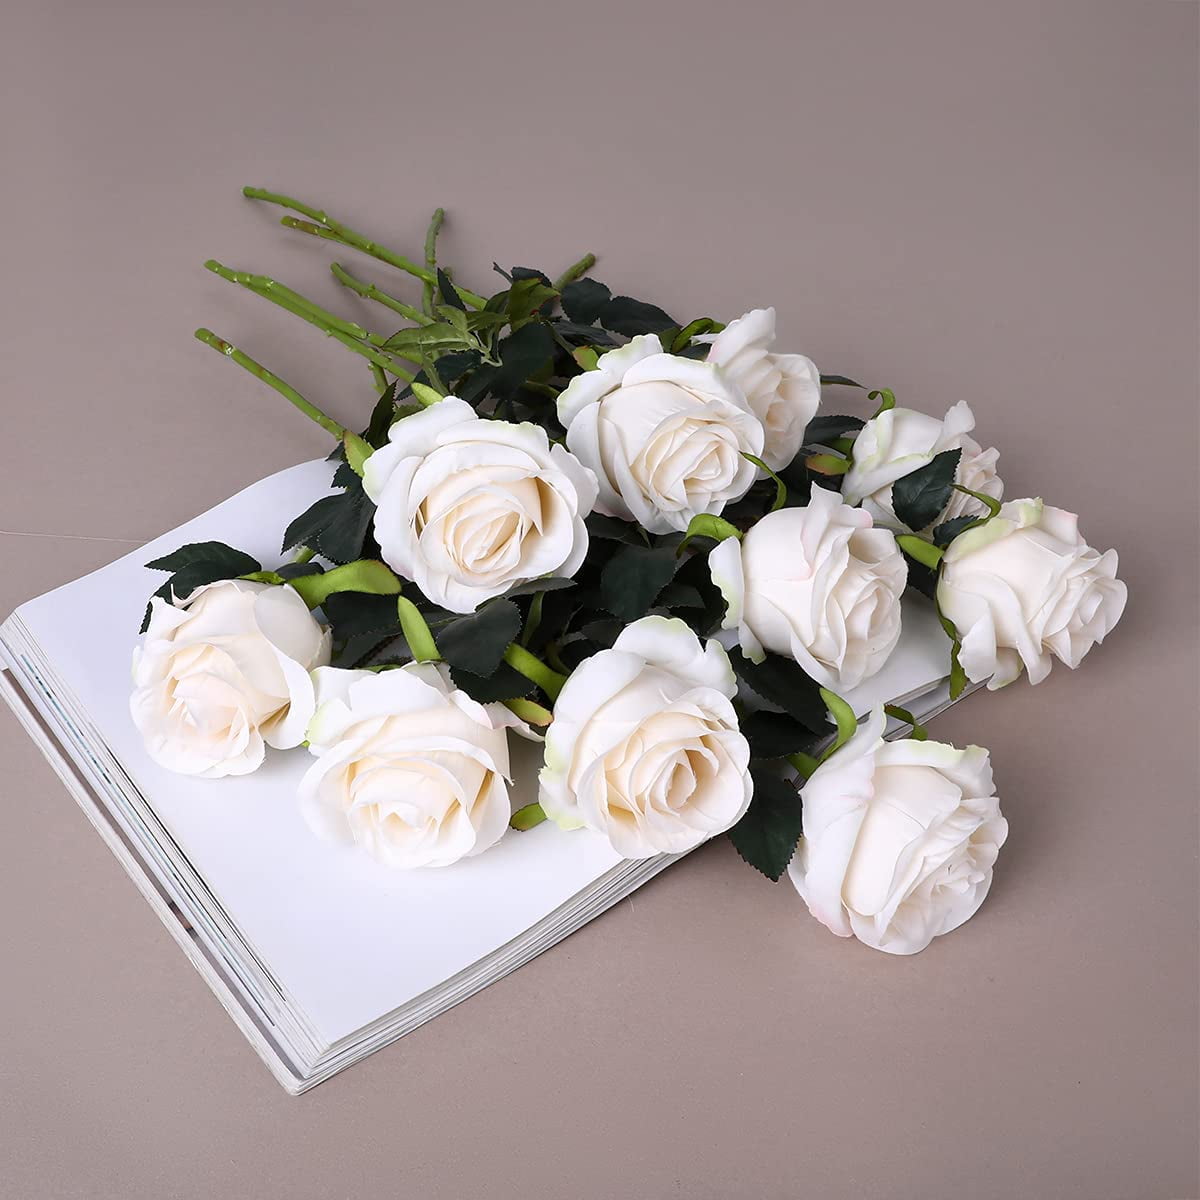 zxcvbnn Party Decorations White Faux Flowers Silk Roses Artificial